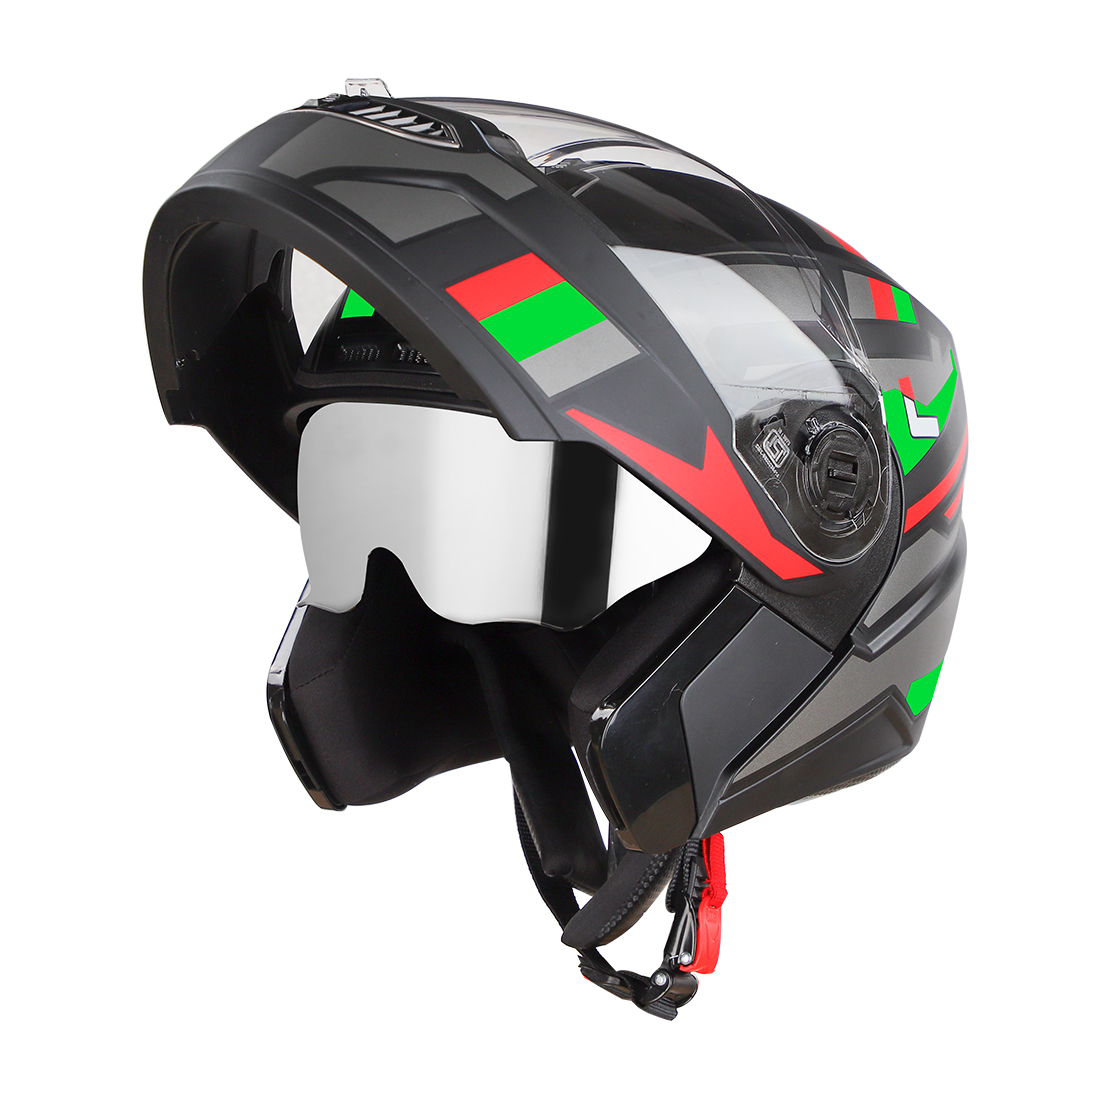 Steelbird SBA-7 Beyond Limit ISI Certified Flip-Up Helmet for Men and Women with Silver Sun Shield (Glossy Black Green)